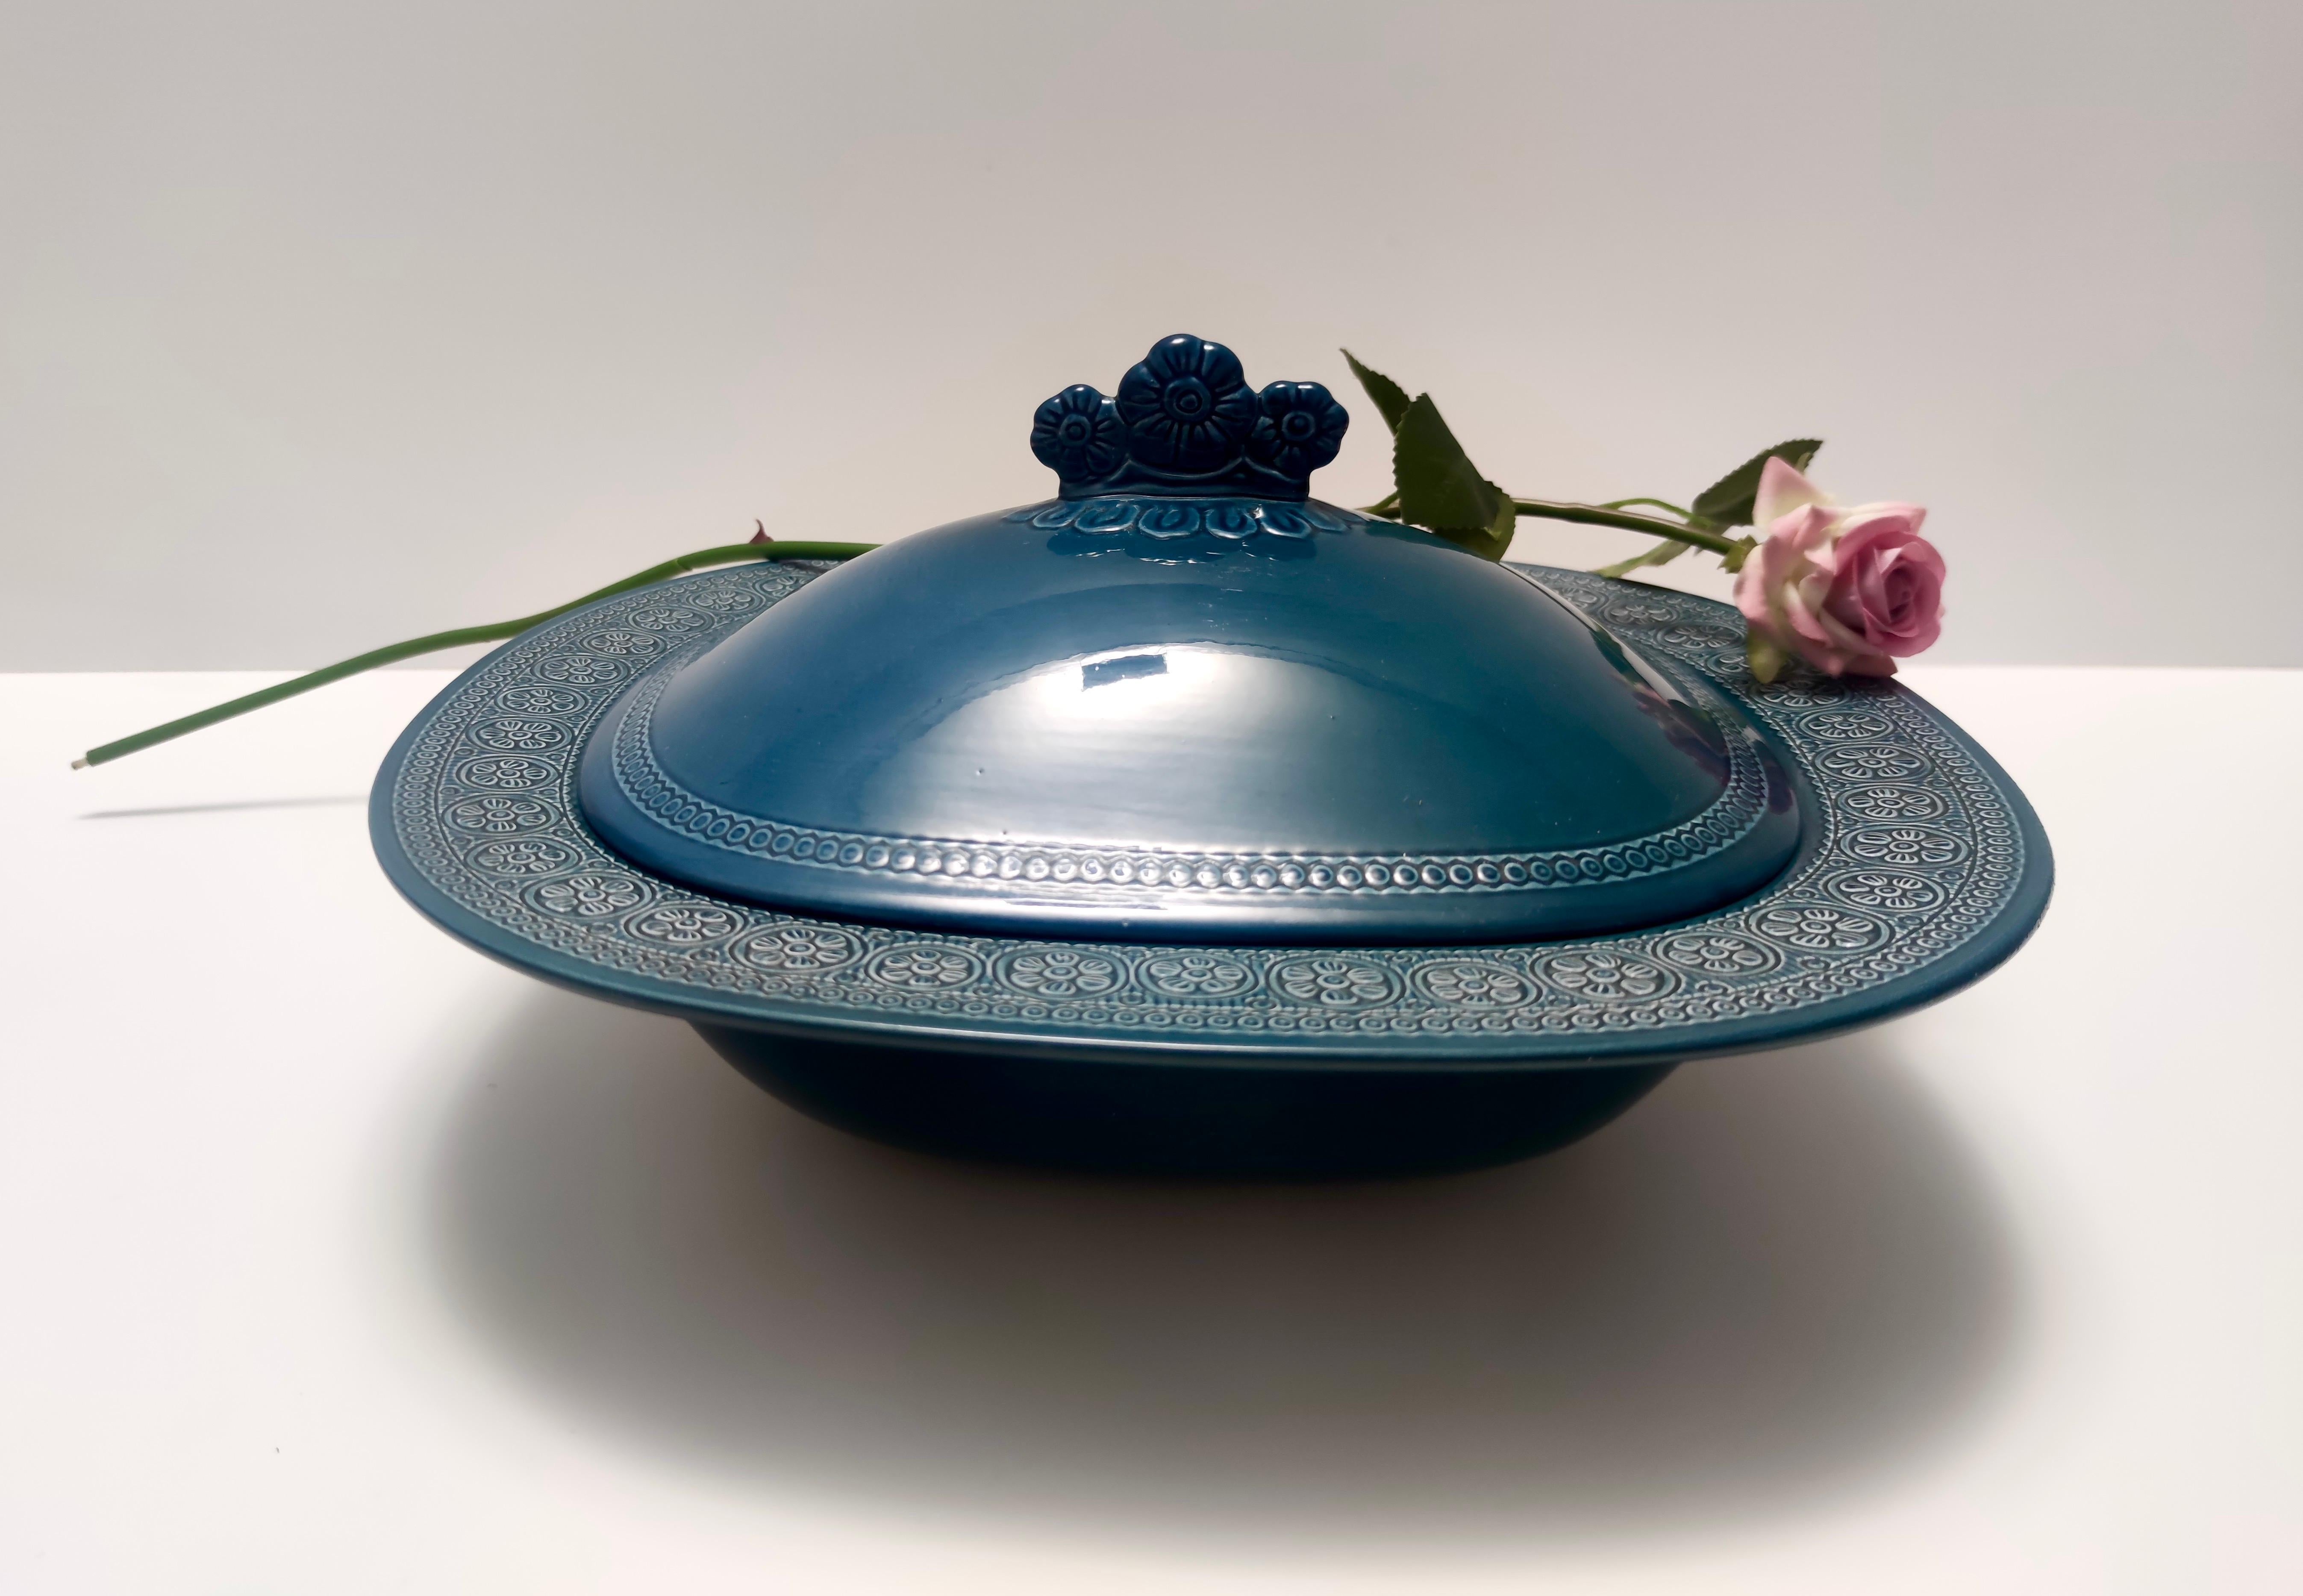 Made in Italy in 1965 by Antonia Campi for Laveno. It is marked on the bottom. 
This centerpiece bowl is made in blue lacquered earthenware with bossed decorations.
This is a vintage item, therefore it might show slight traces of use, but it can be